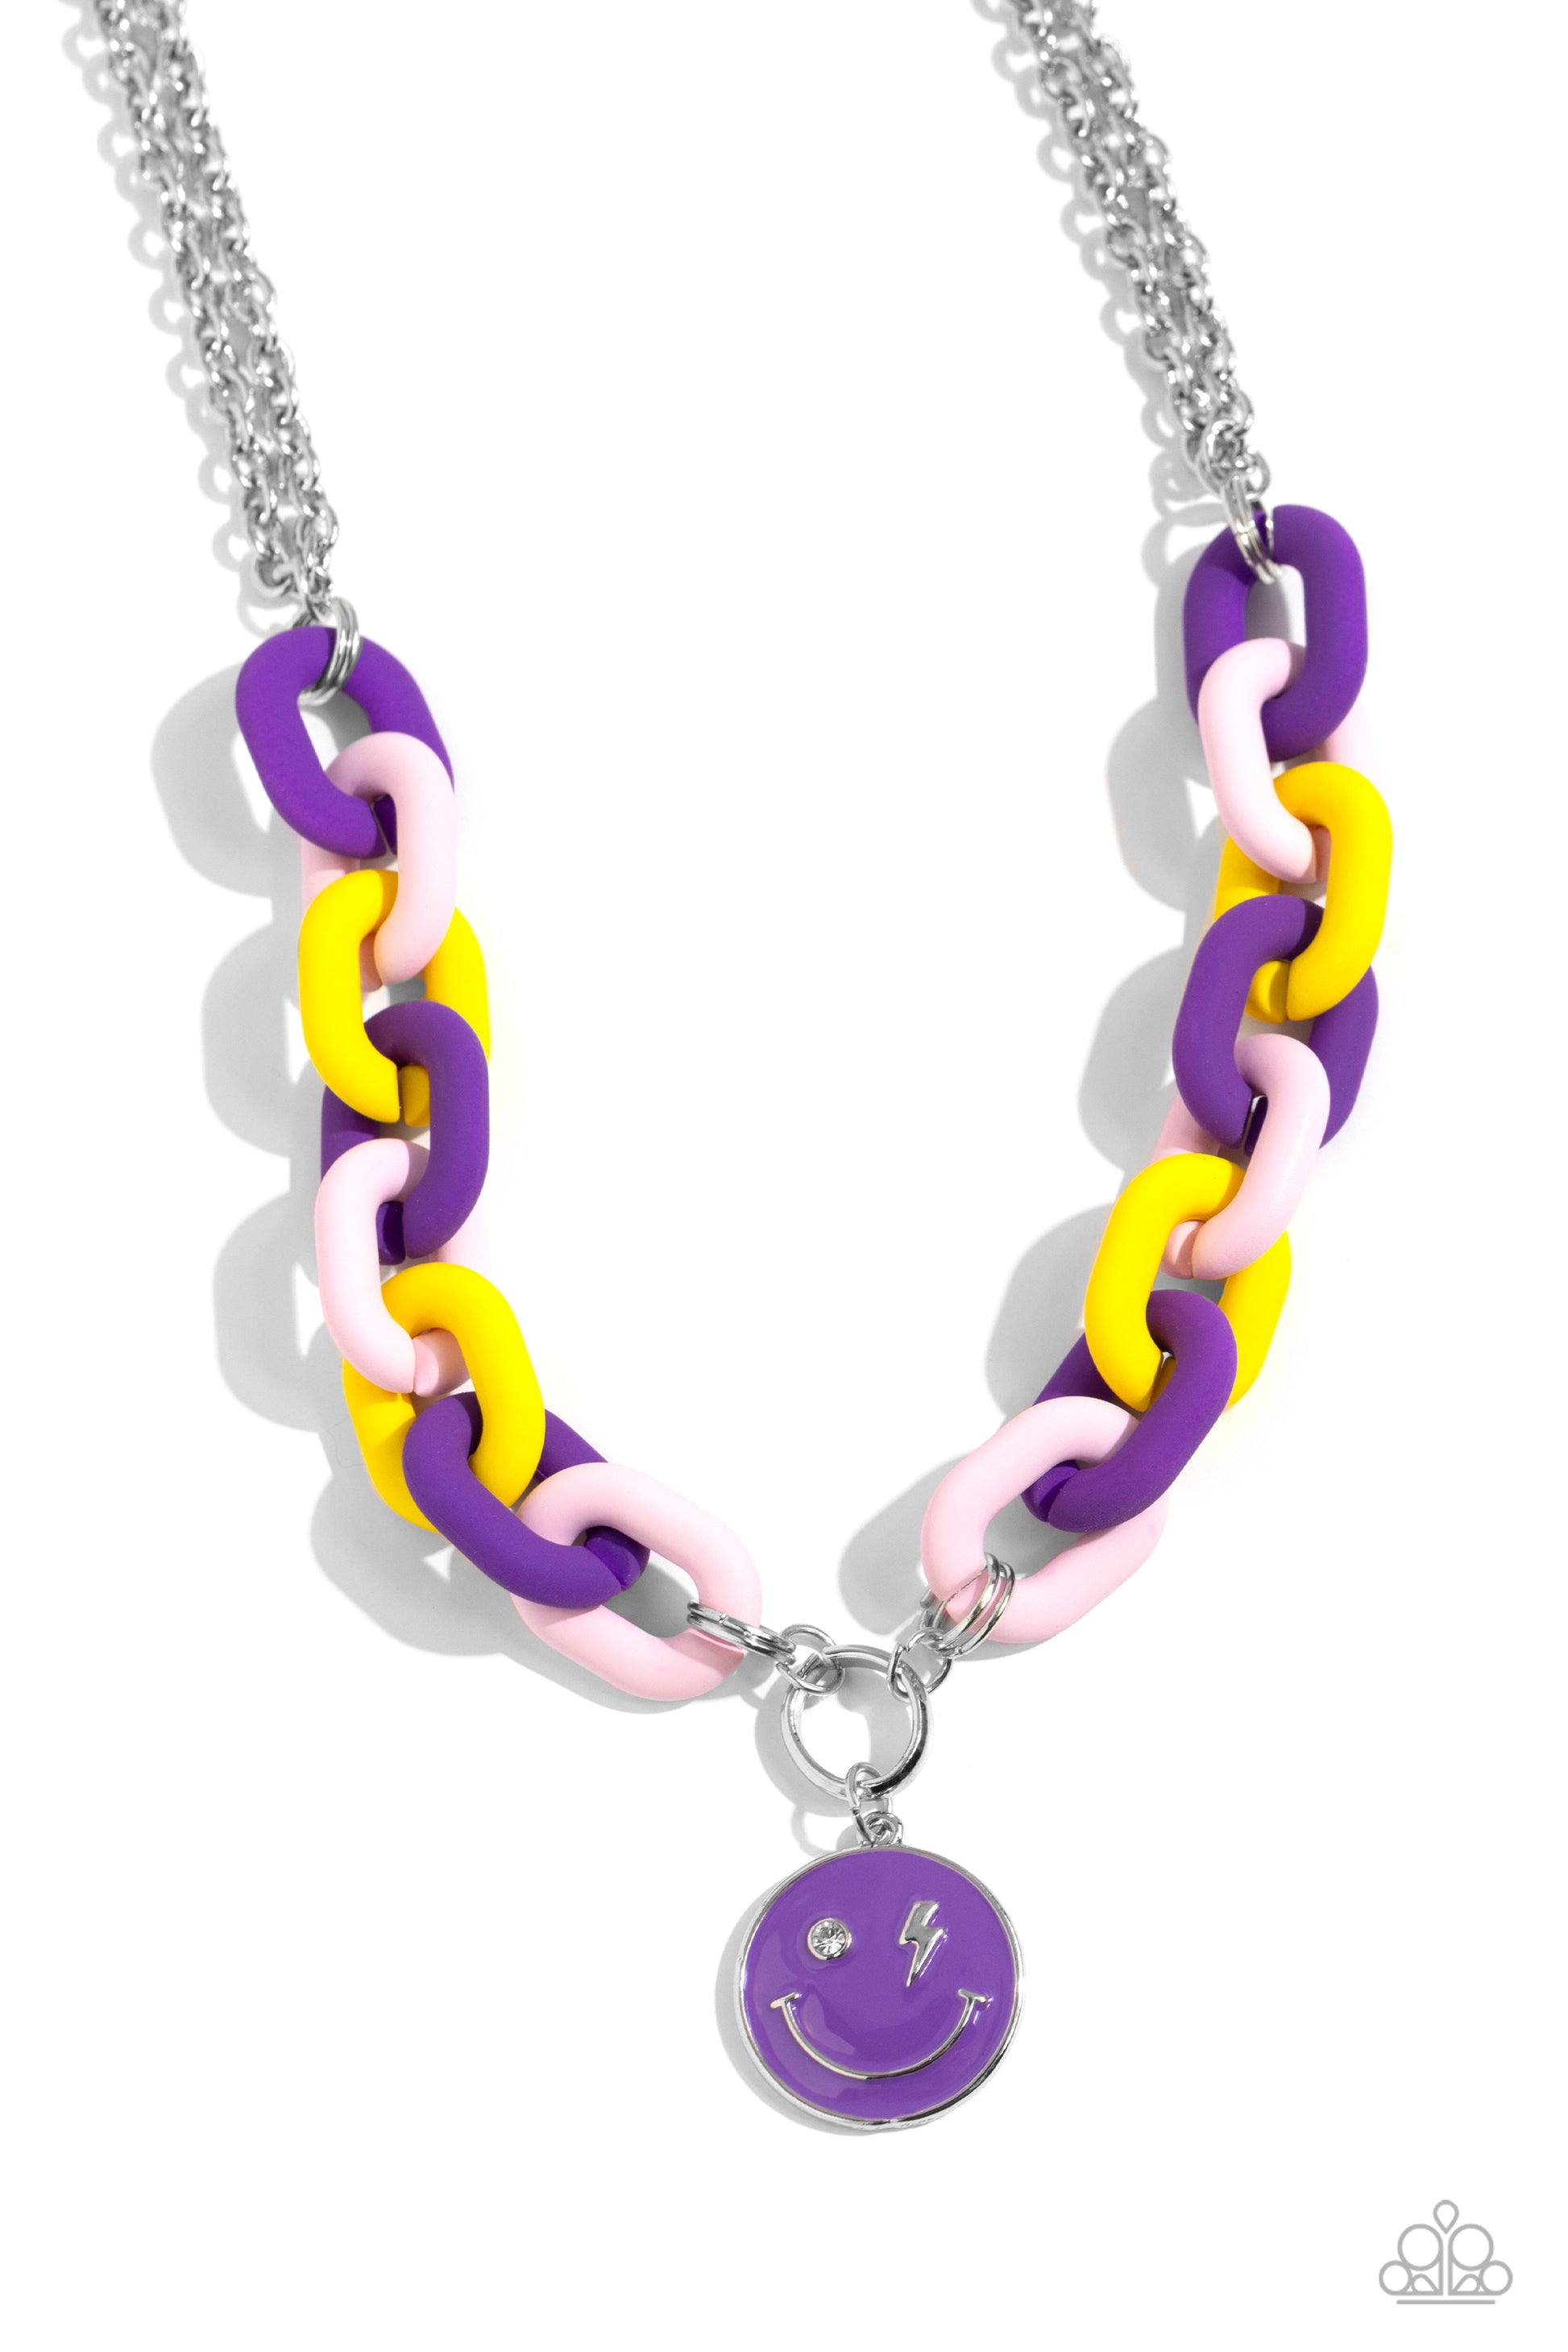 Paparazzi Accessories - Speed Smile - Purple Jewelry Sets two strands of silver chain give way to a strand of oversized purple, baby pink, and yellow acrylic links for a colorful statement. A purple-painted smiley face pendant, with a lightning bolt for one eye, cascades from the colorful links for an exaggerated touch of personality. Features an adjustable clasp closure.